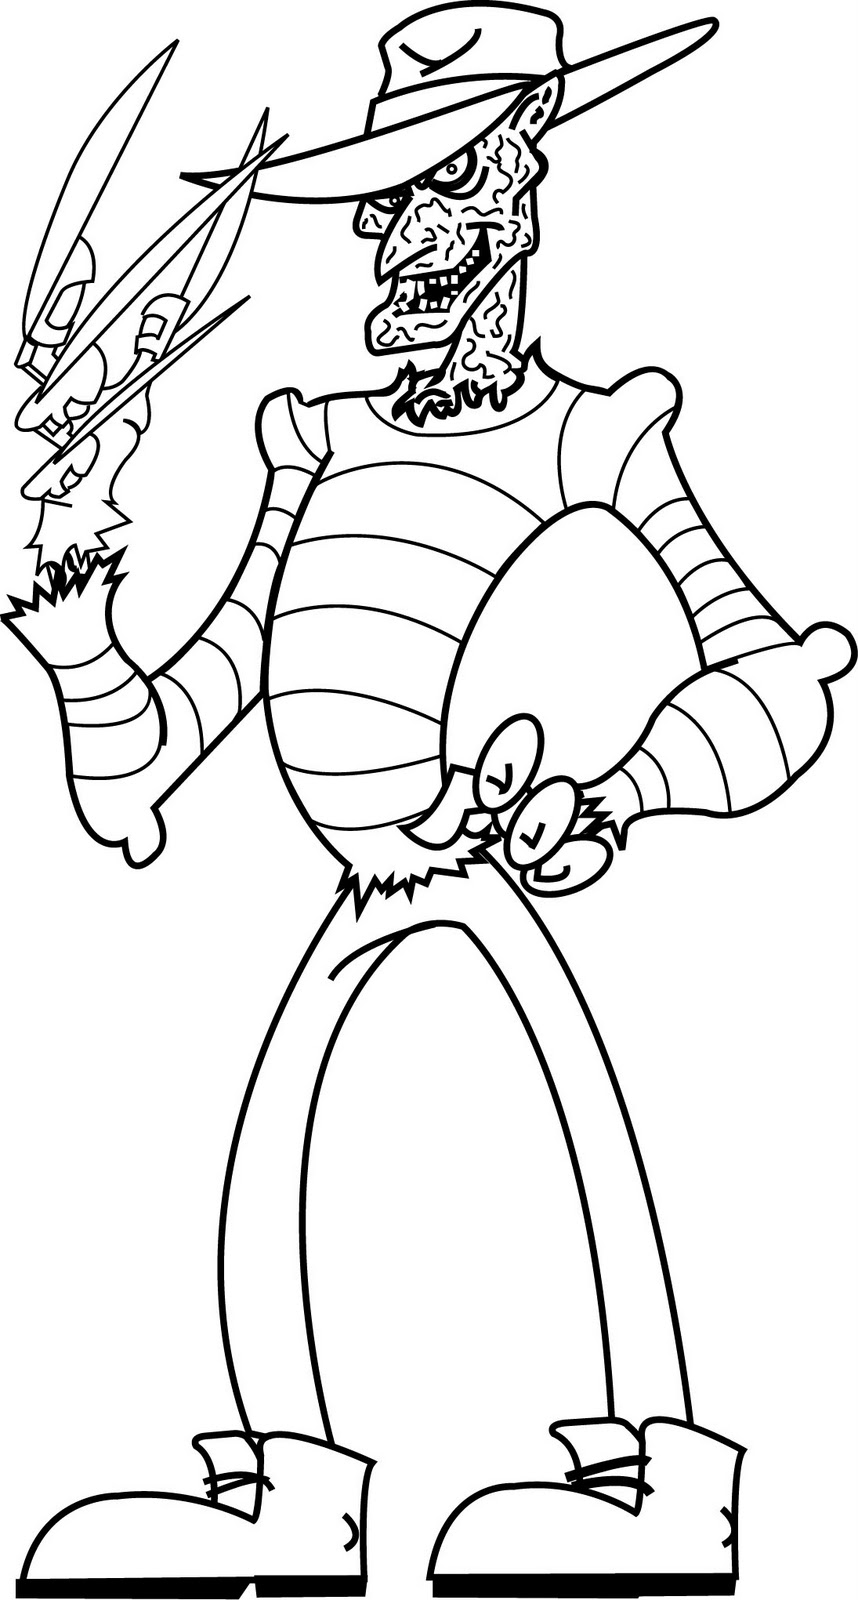 Free Five Nights At Freddy Coloring Pages Coloring Wallpapers Download Free Images Wallpaper [coloring654.blogspot.com]